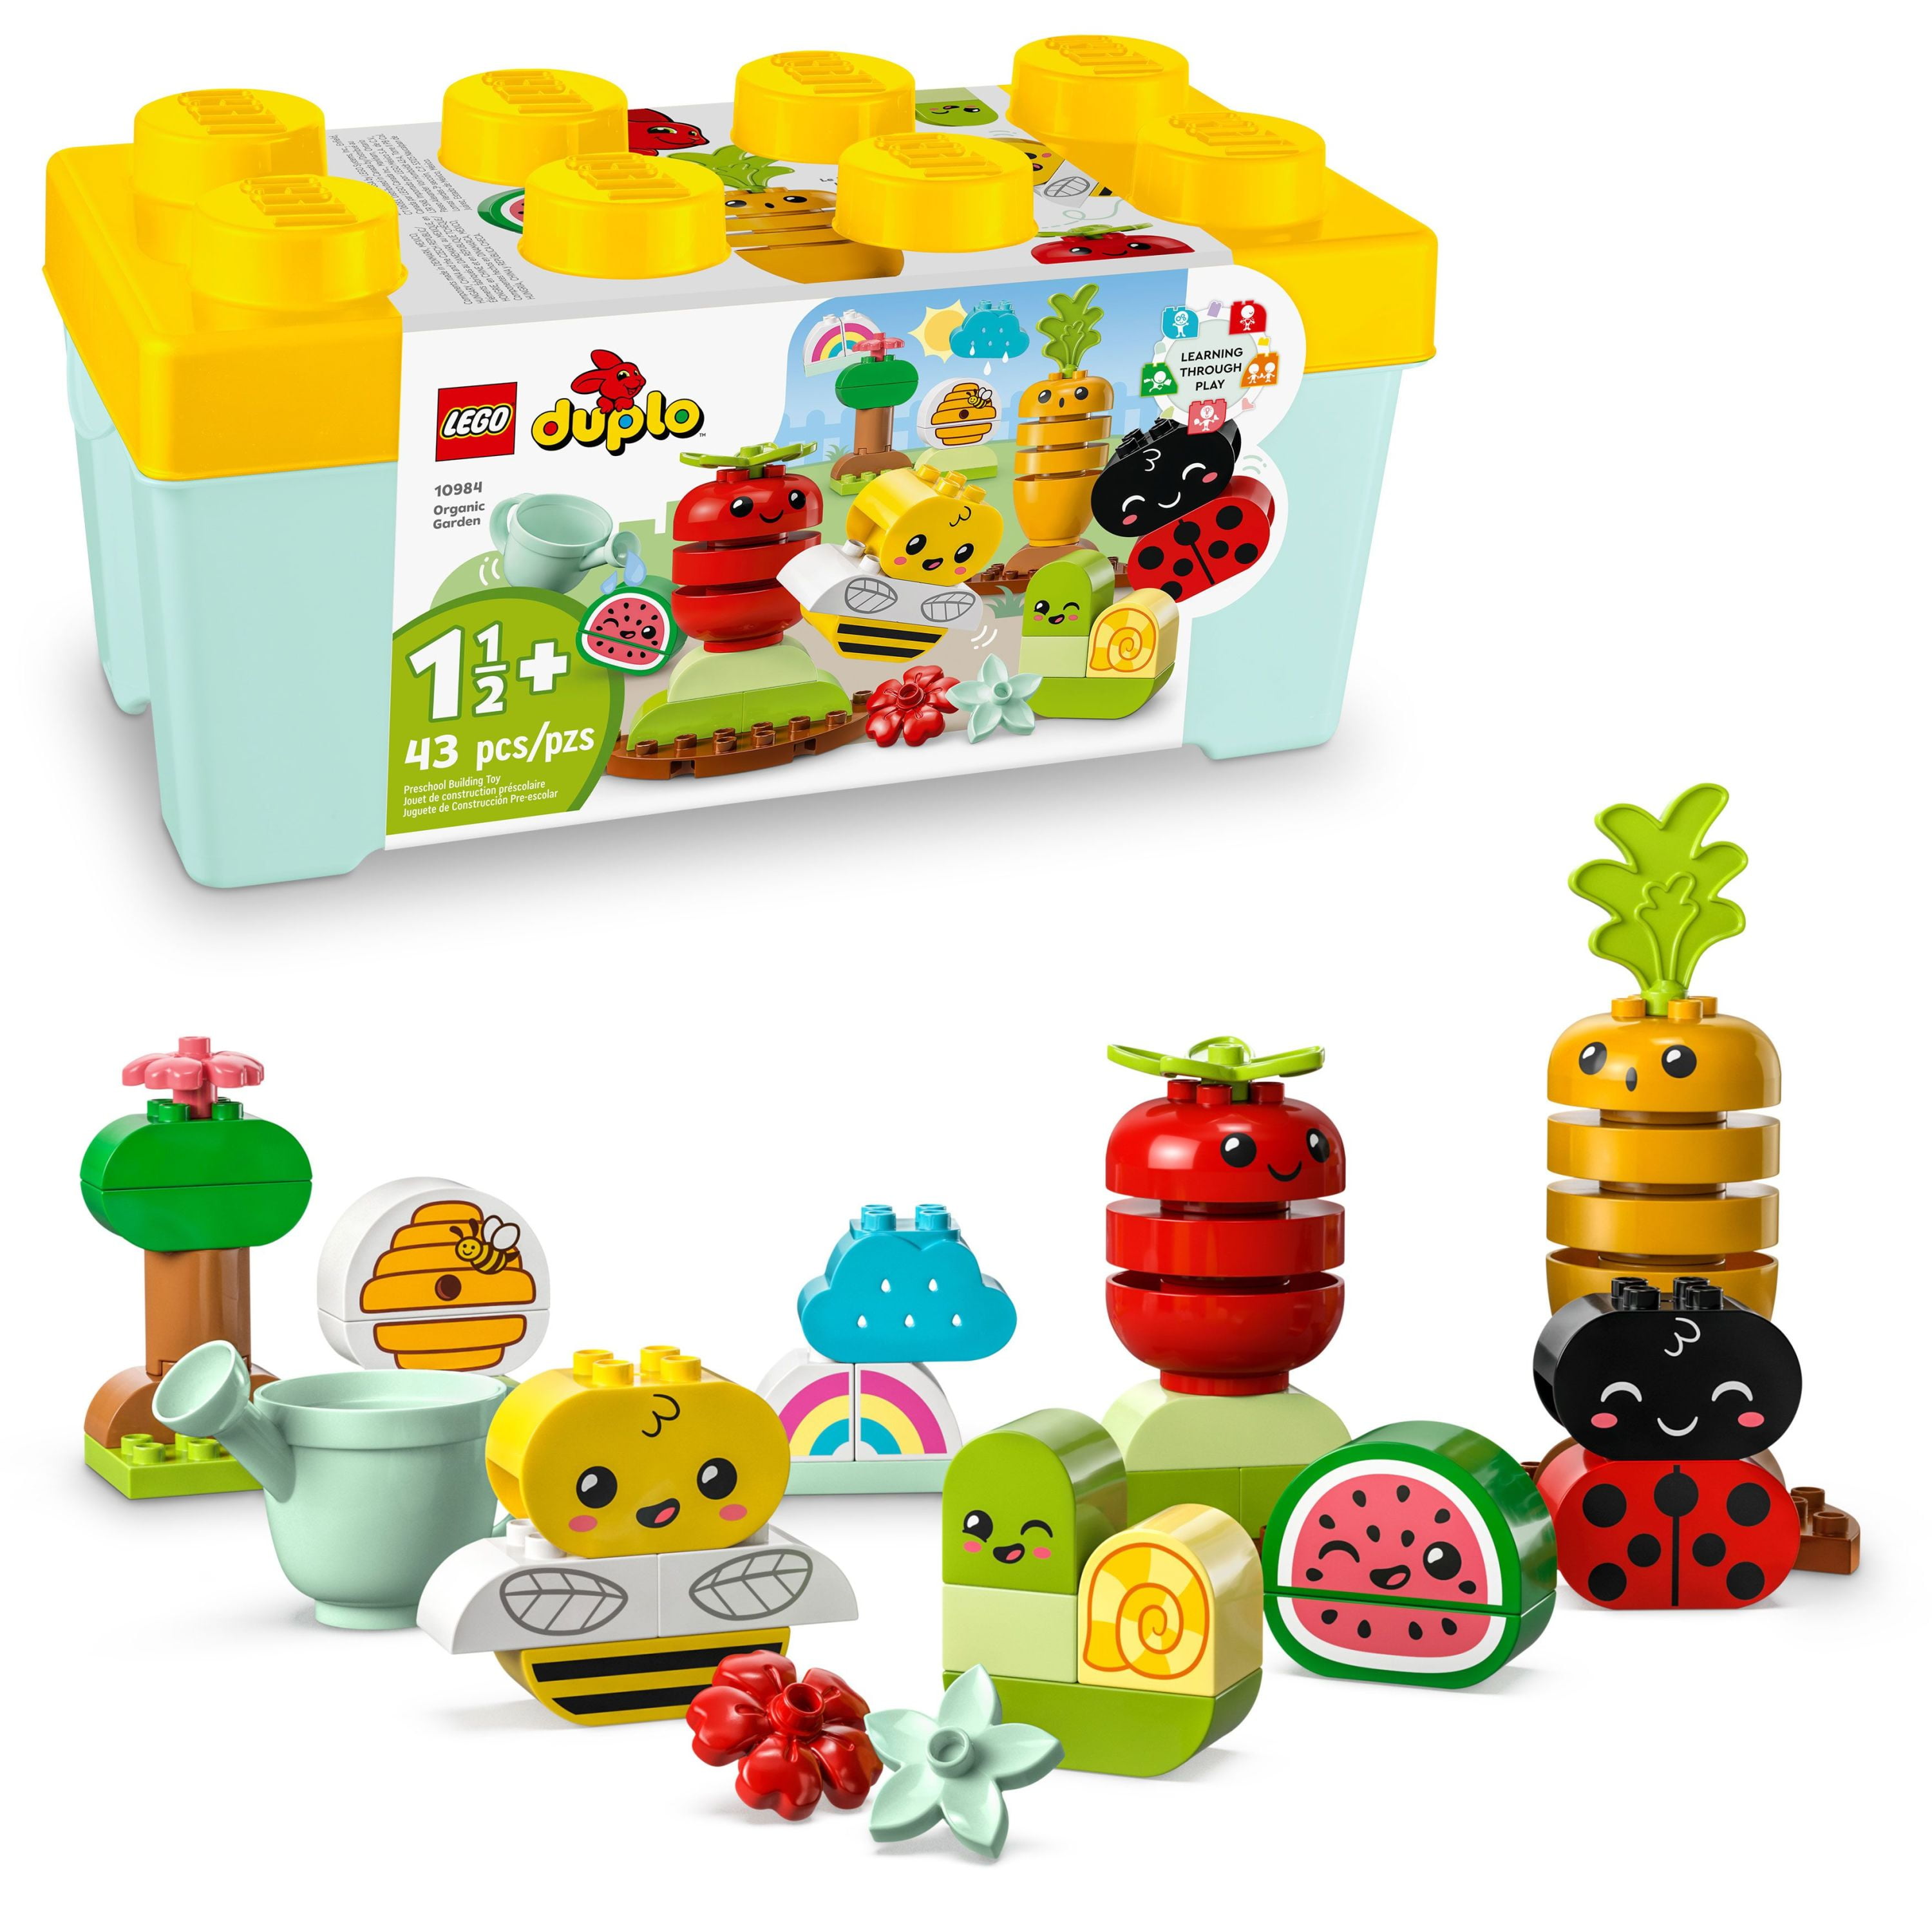 LEGO DUPLO My First Organic Garden Brick Box 10984, Stacking Toys for  Babies and Toddlers 1.5+ Years Old, Learning Toy with Ladybug, Bumblebee,  Fruit